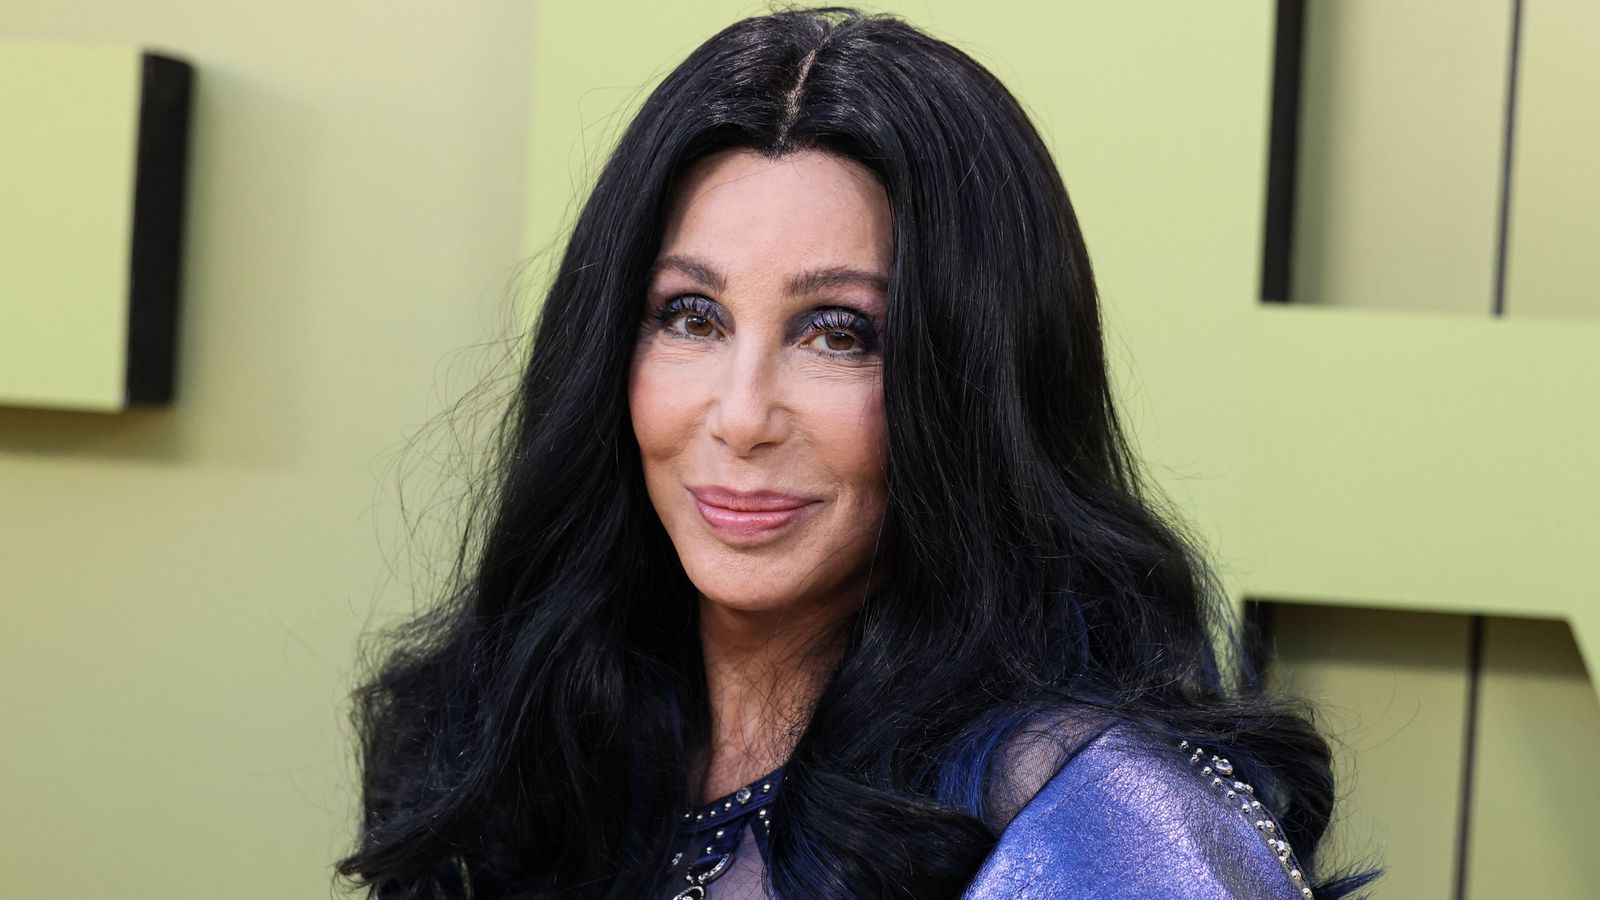 Singer Cher denies allegations she hired four men to kidnap her 47-year-old son | Ents & Arts News